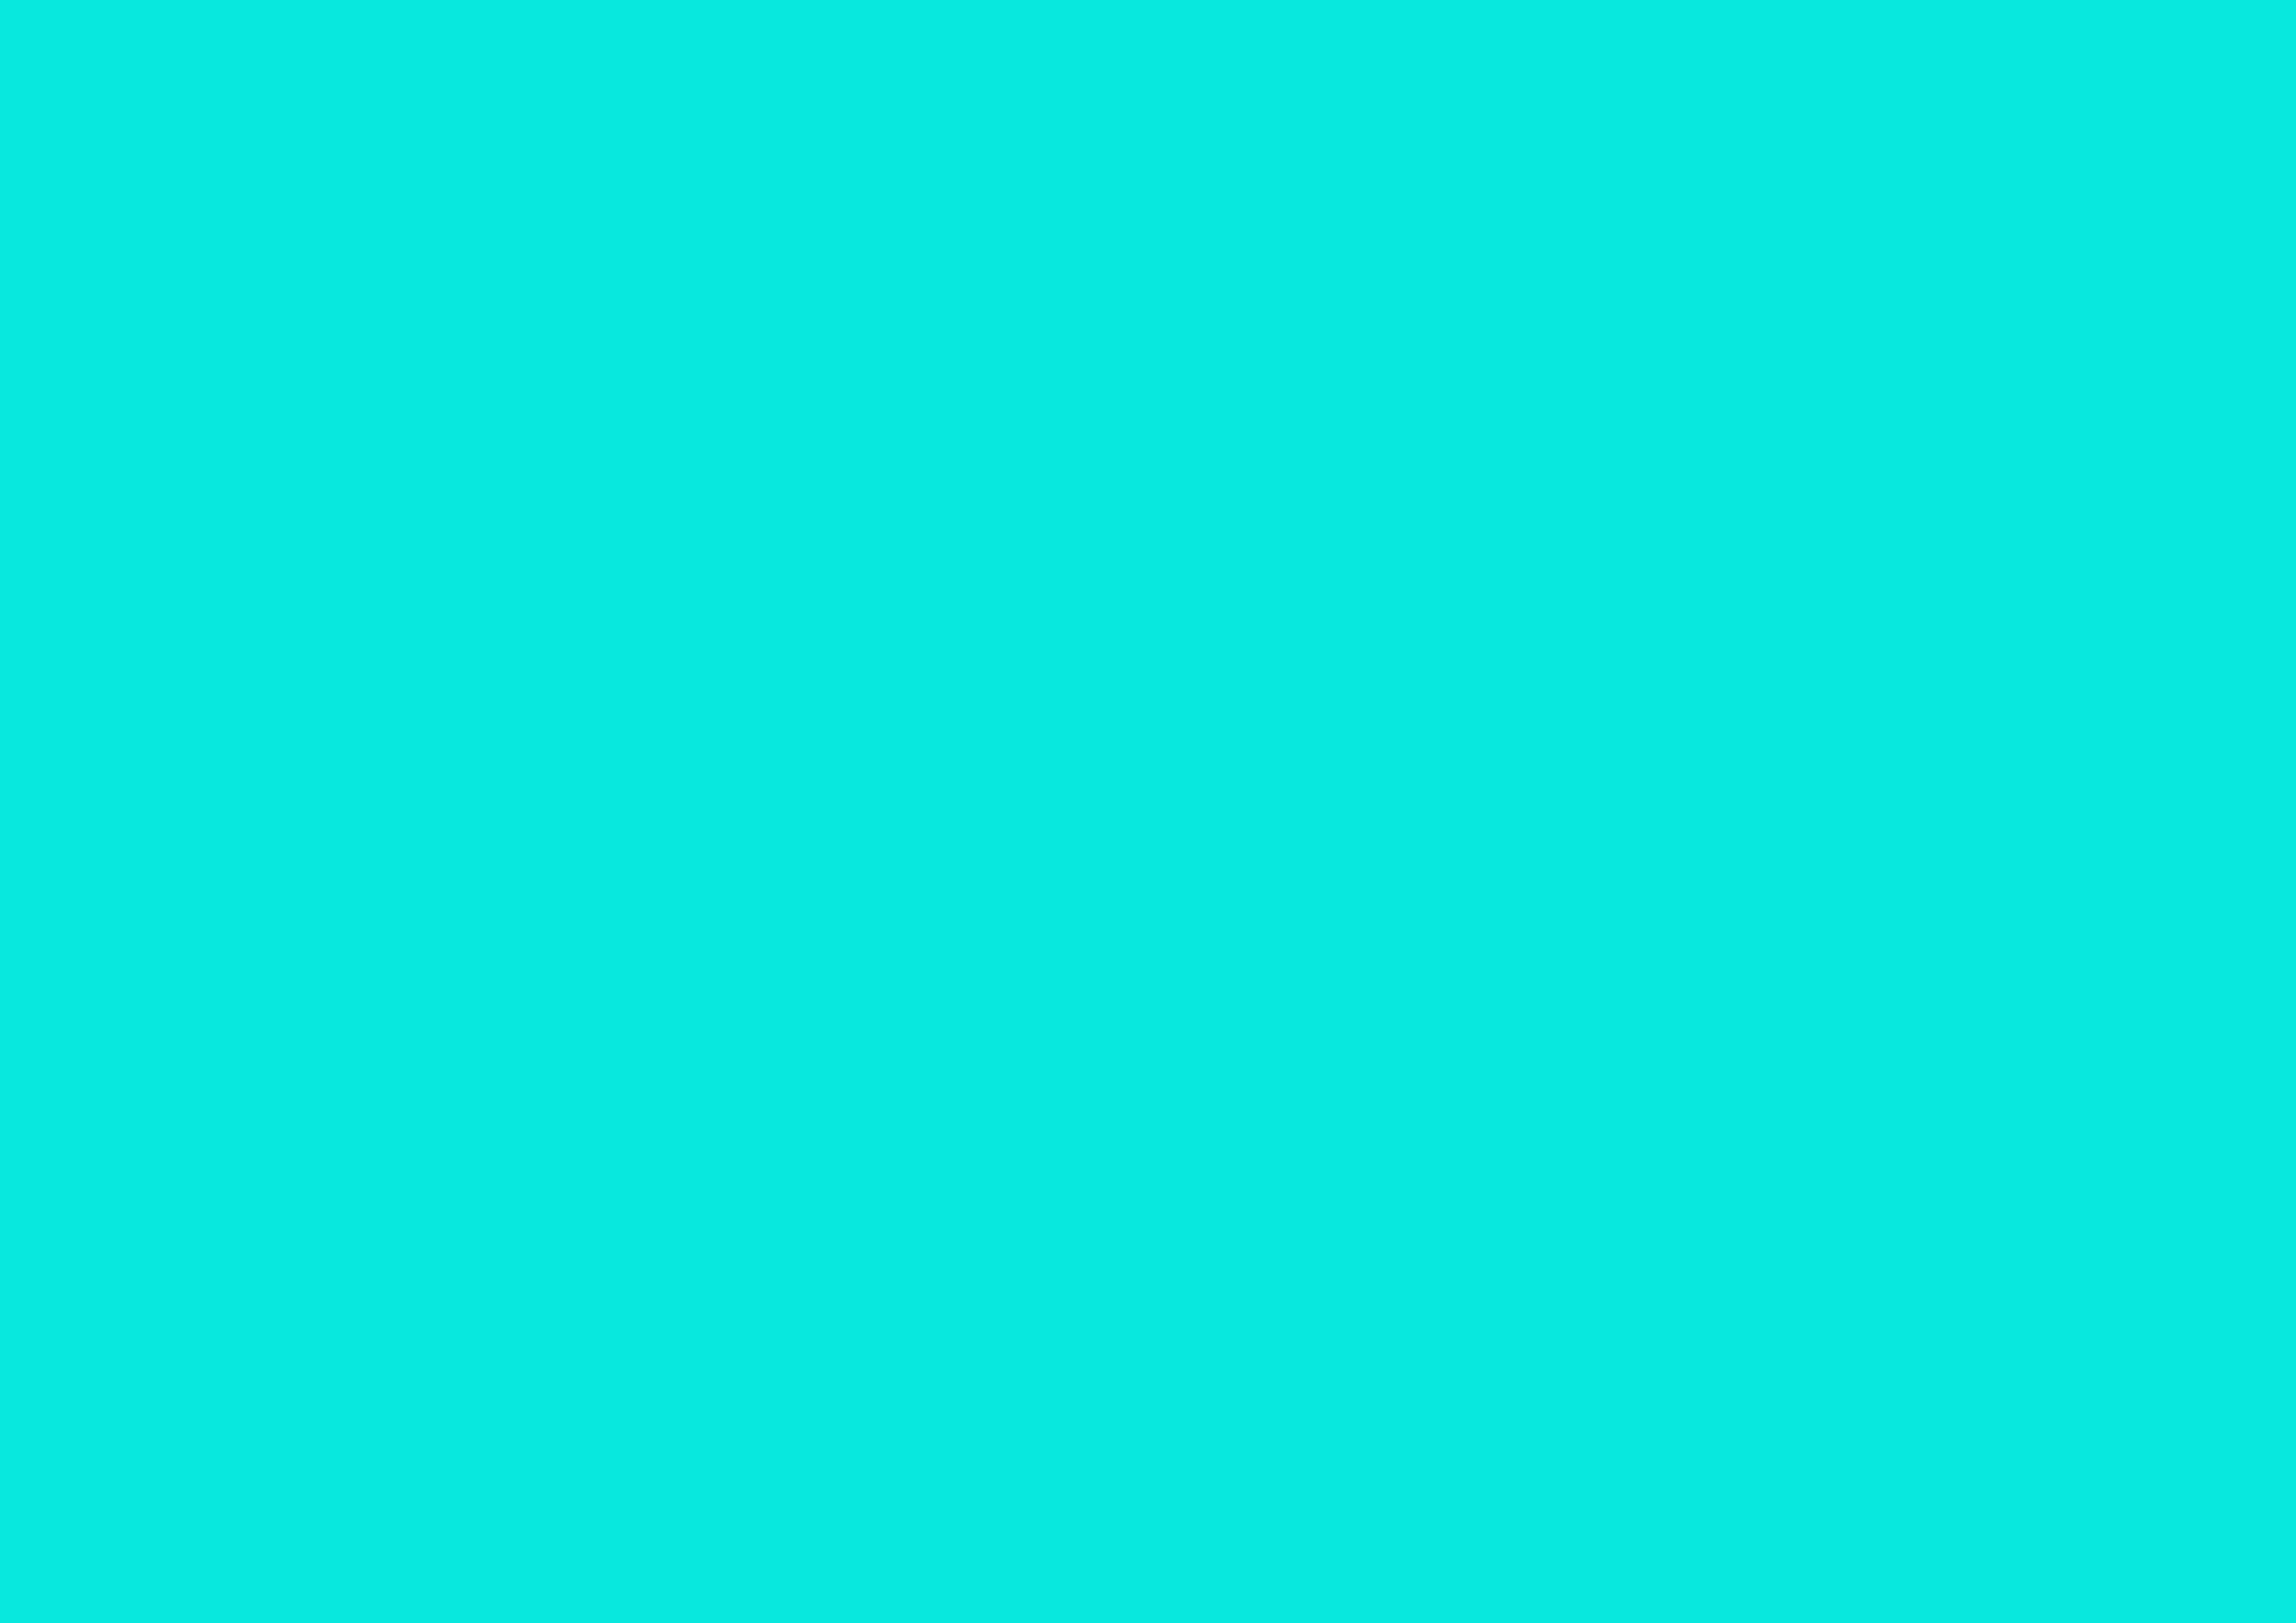 https://www.solidbackgrounds.com/images/3508x2480/3508x2480-bright-turquoise-solid-color-background.jpg